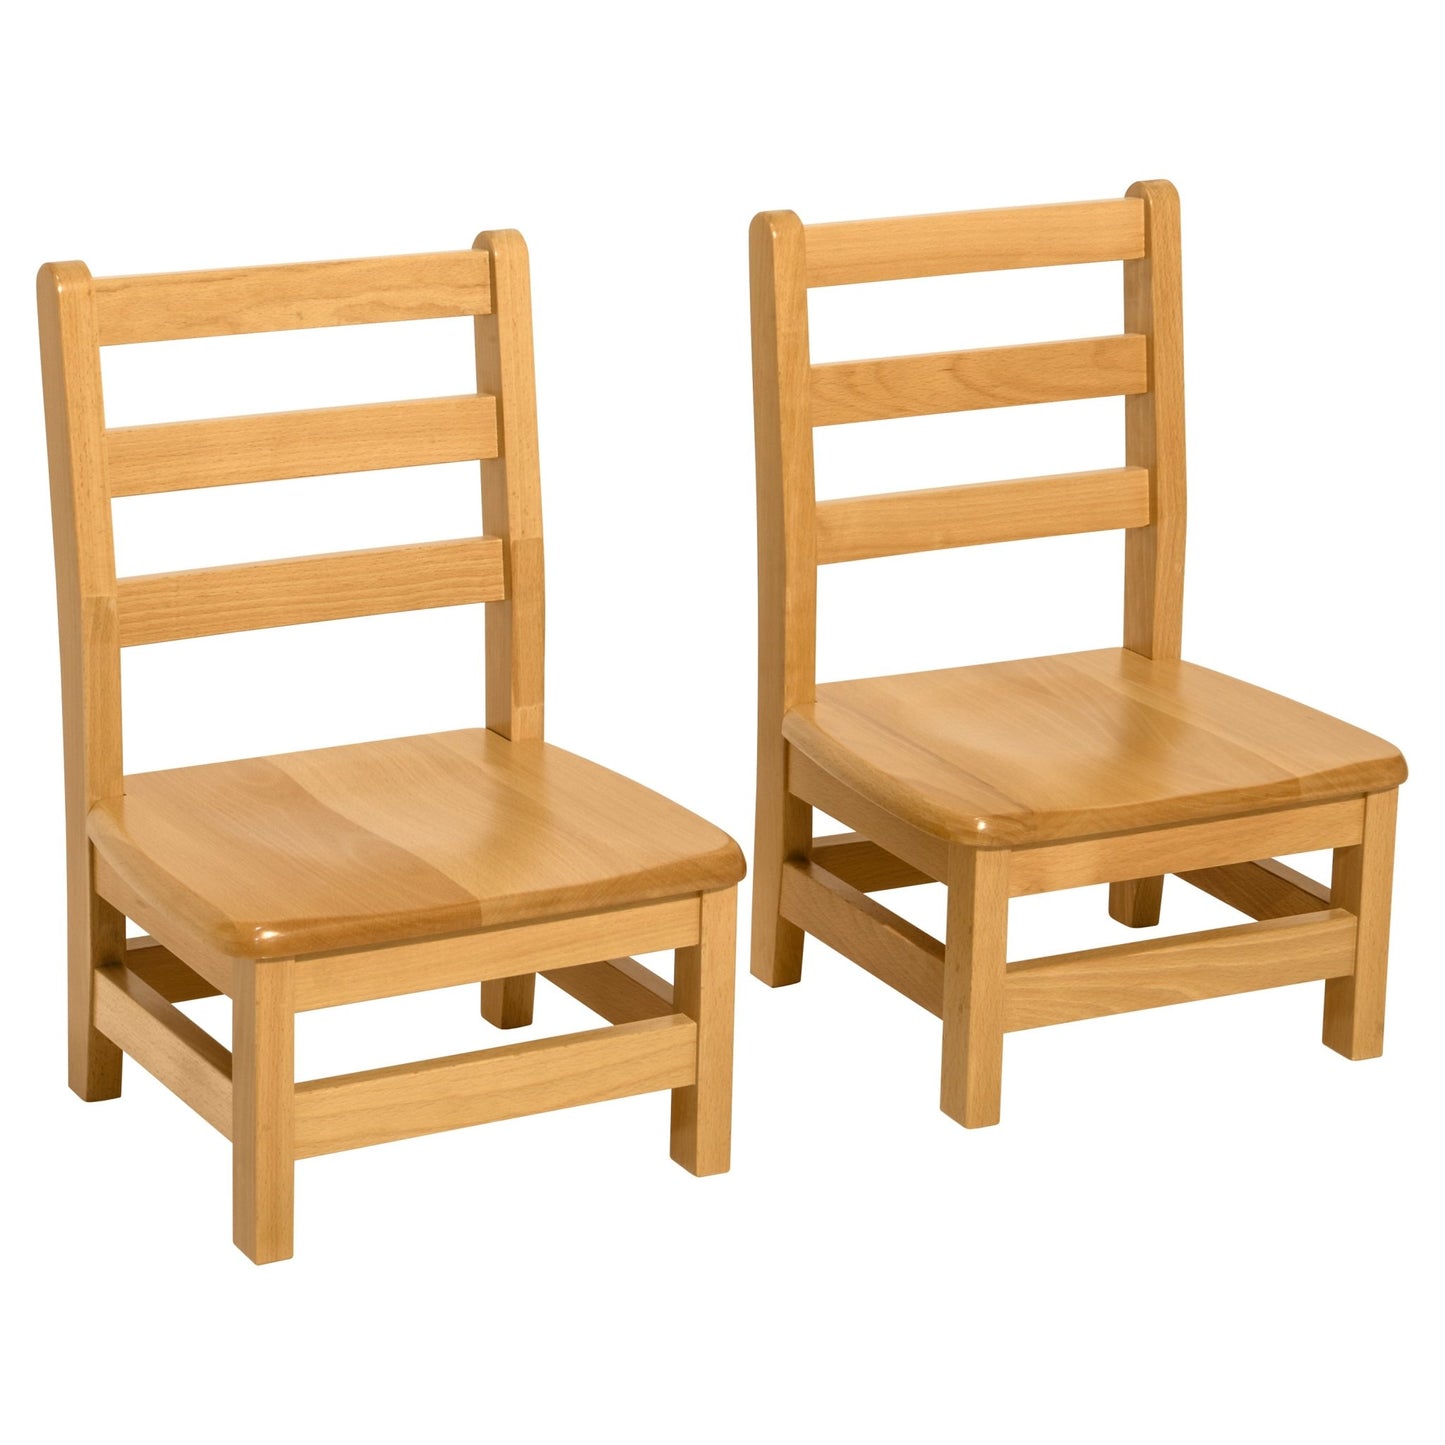 Wood Designs 12" Chair, Carton of (2) - (81202) - SchoolOutlet